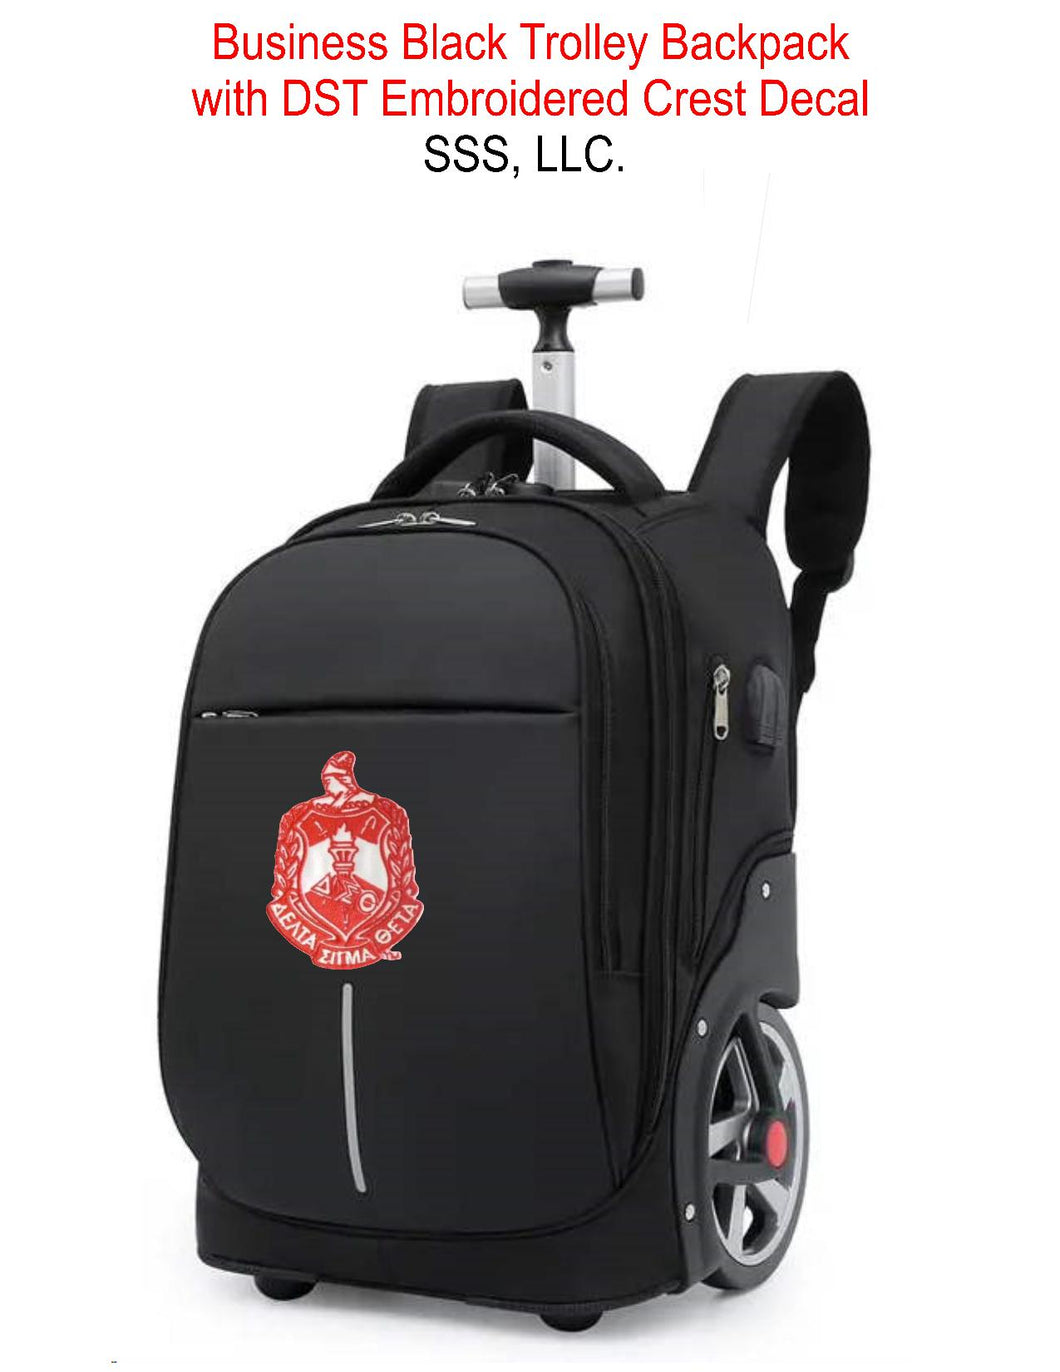 Trolley Backpack with large wheels, collapsible metal handle, and DST embroidered crest decal